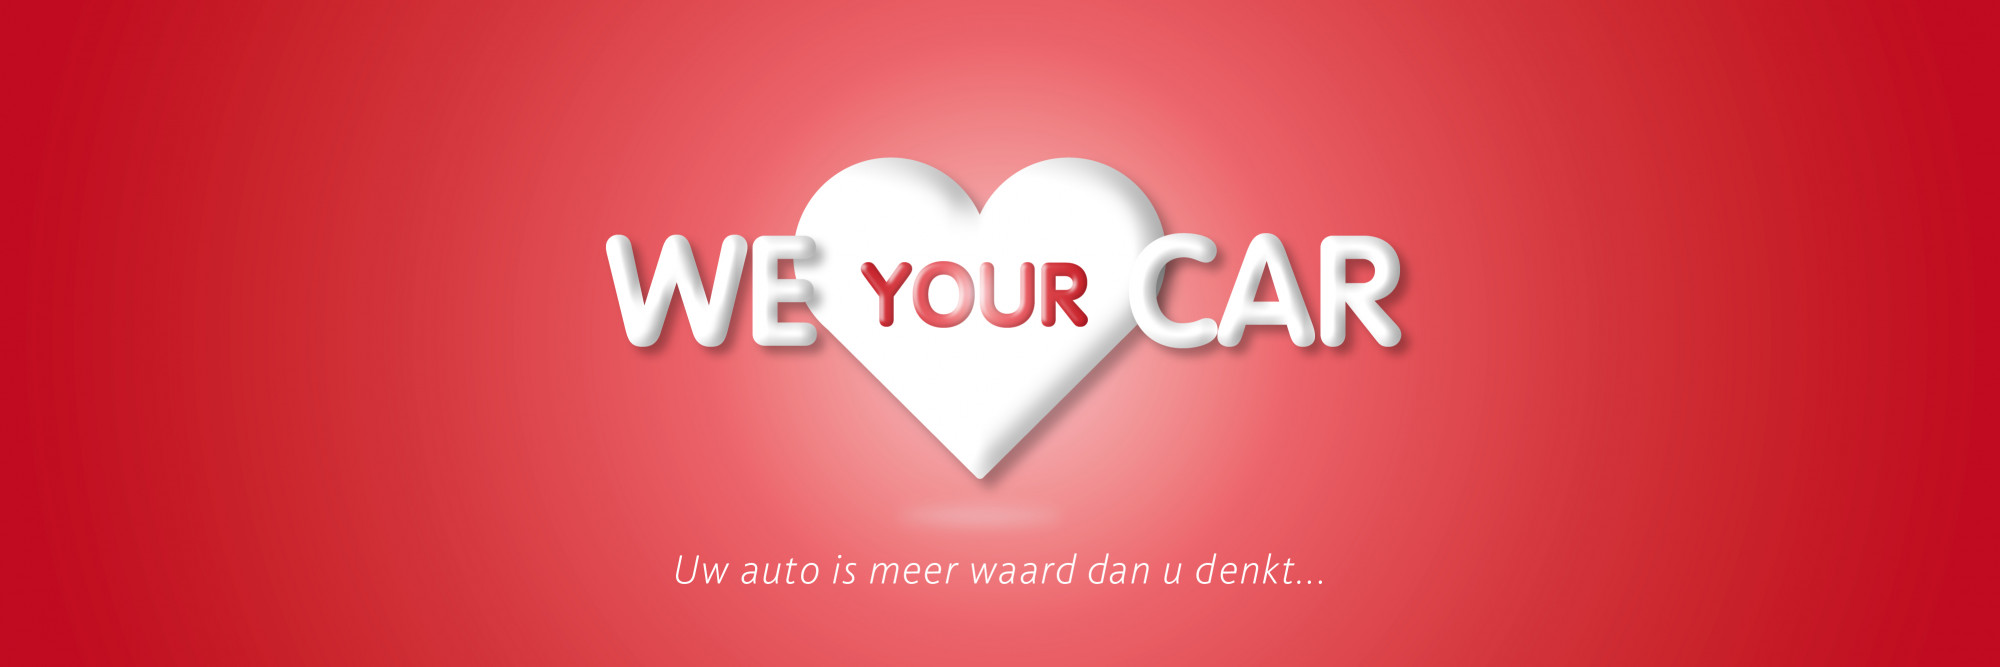 Hero NEW We love your car v2